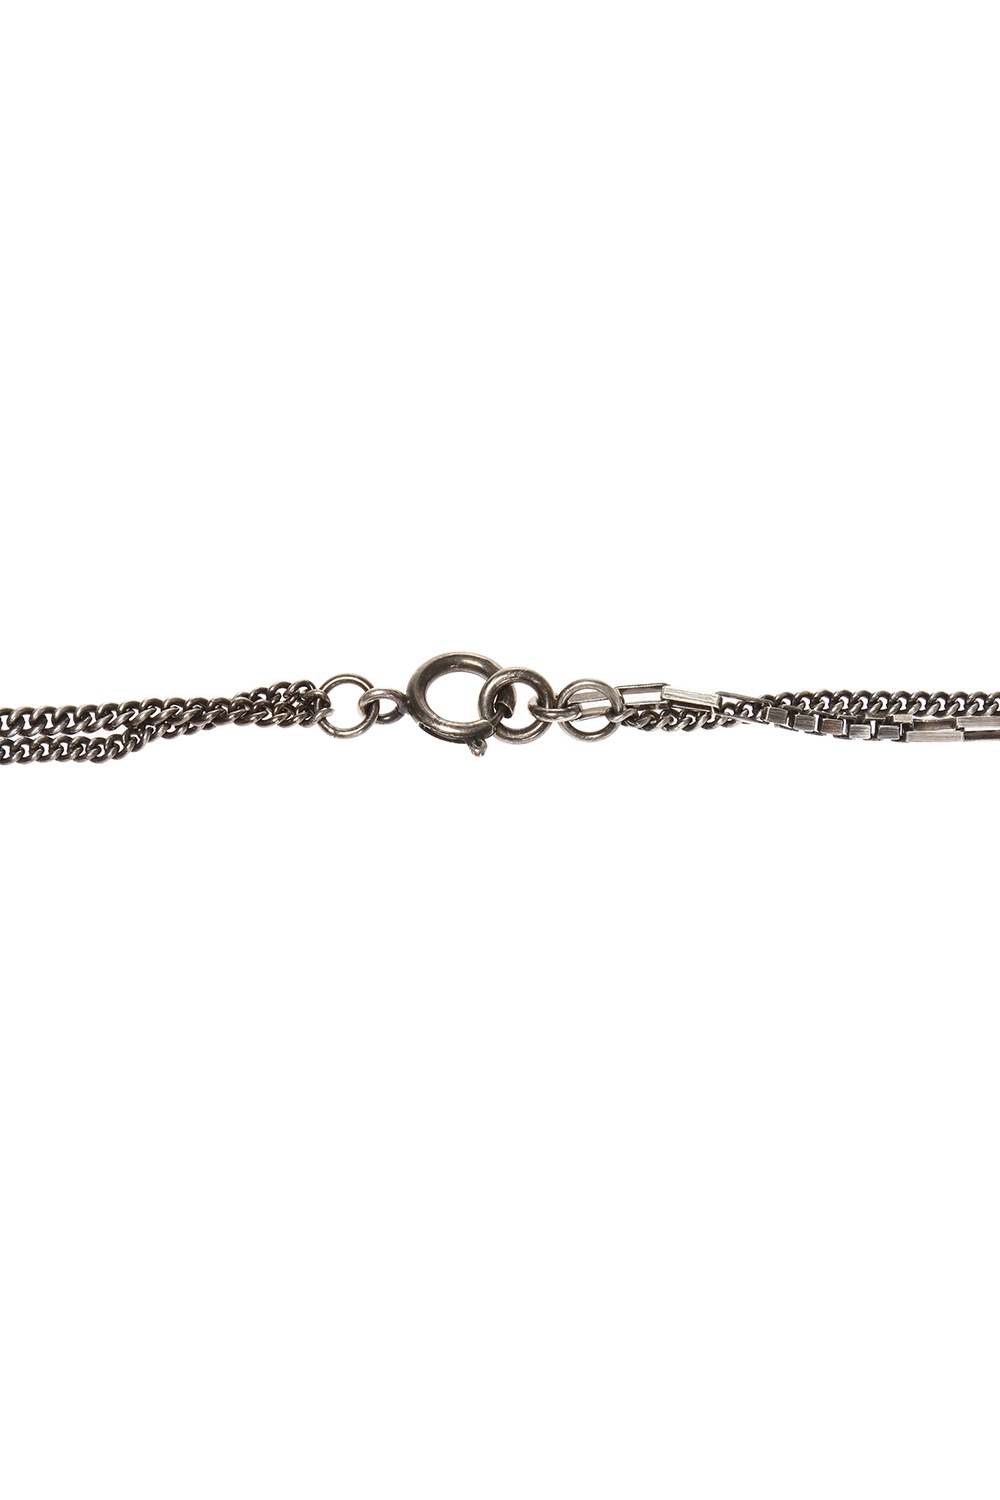 Ann Demeulemeester Chain necklace with medallions | Women's